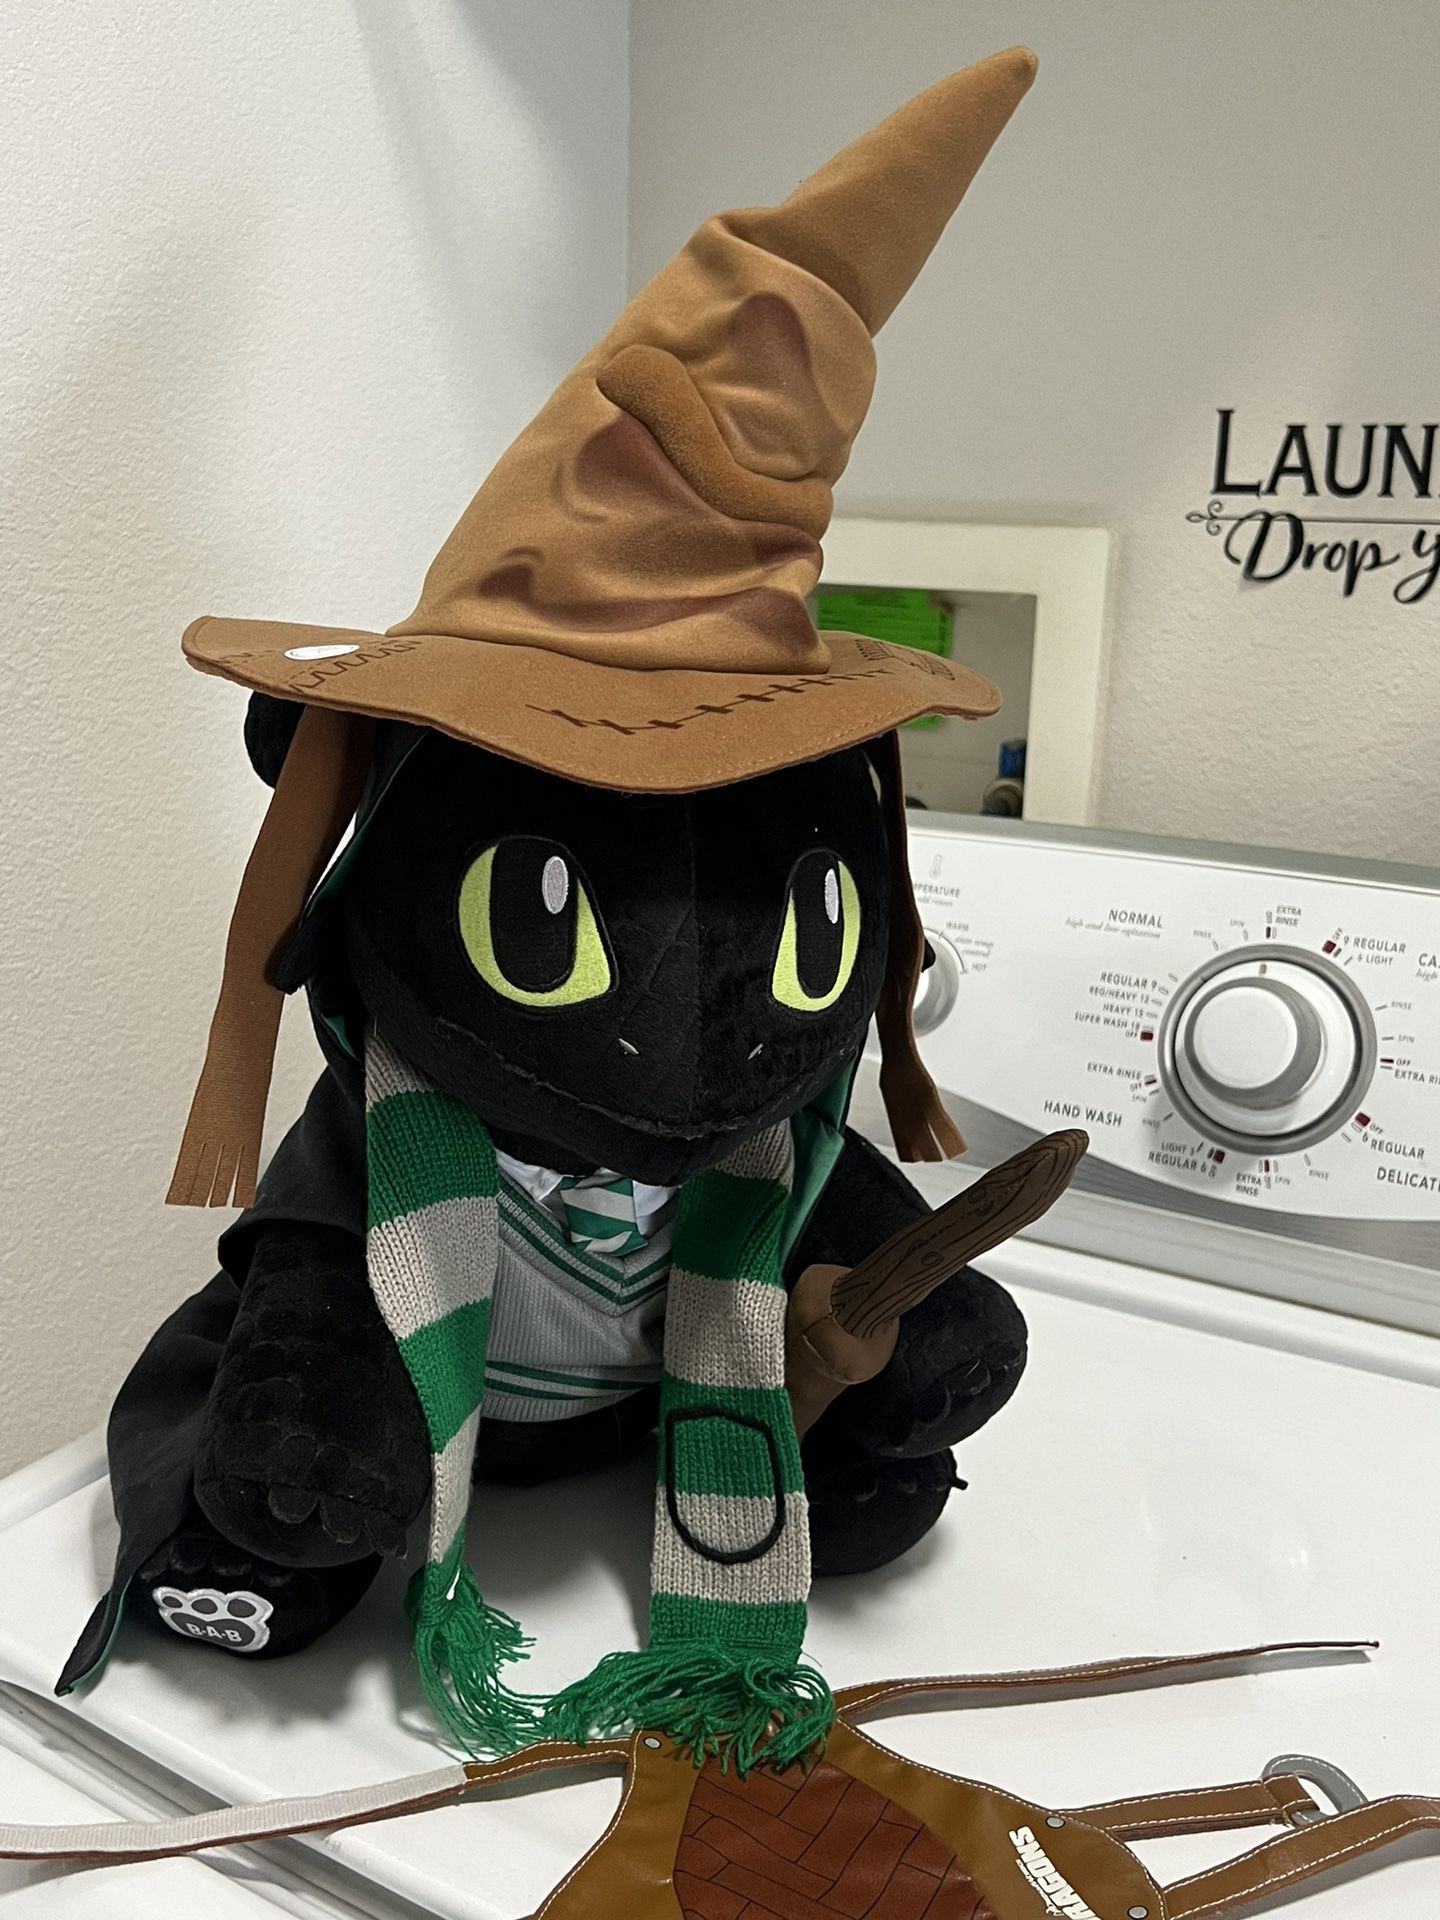 Toothless Build a Bear plush How to Train Your Dragon harry potter 